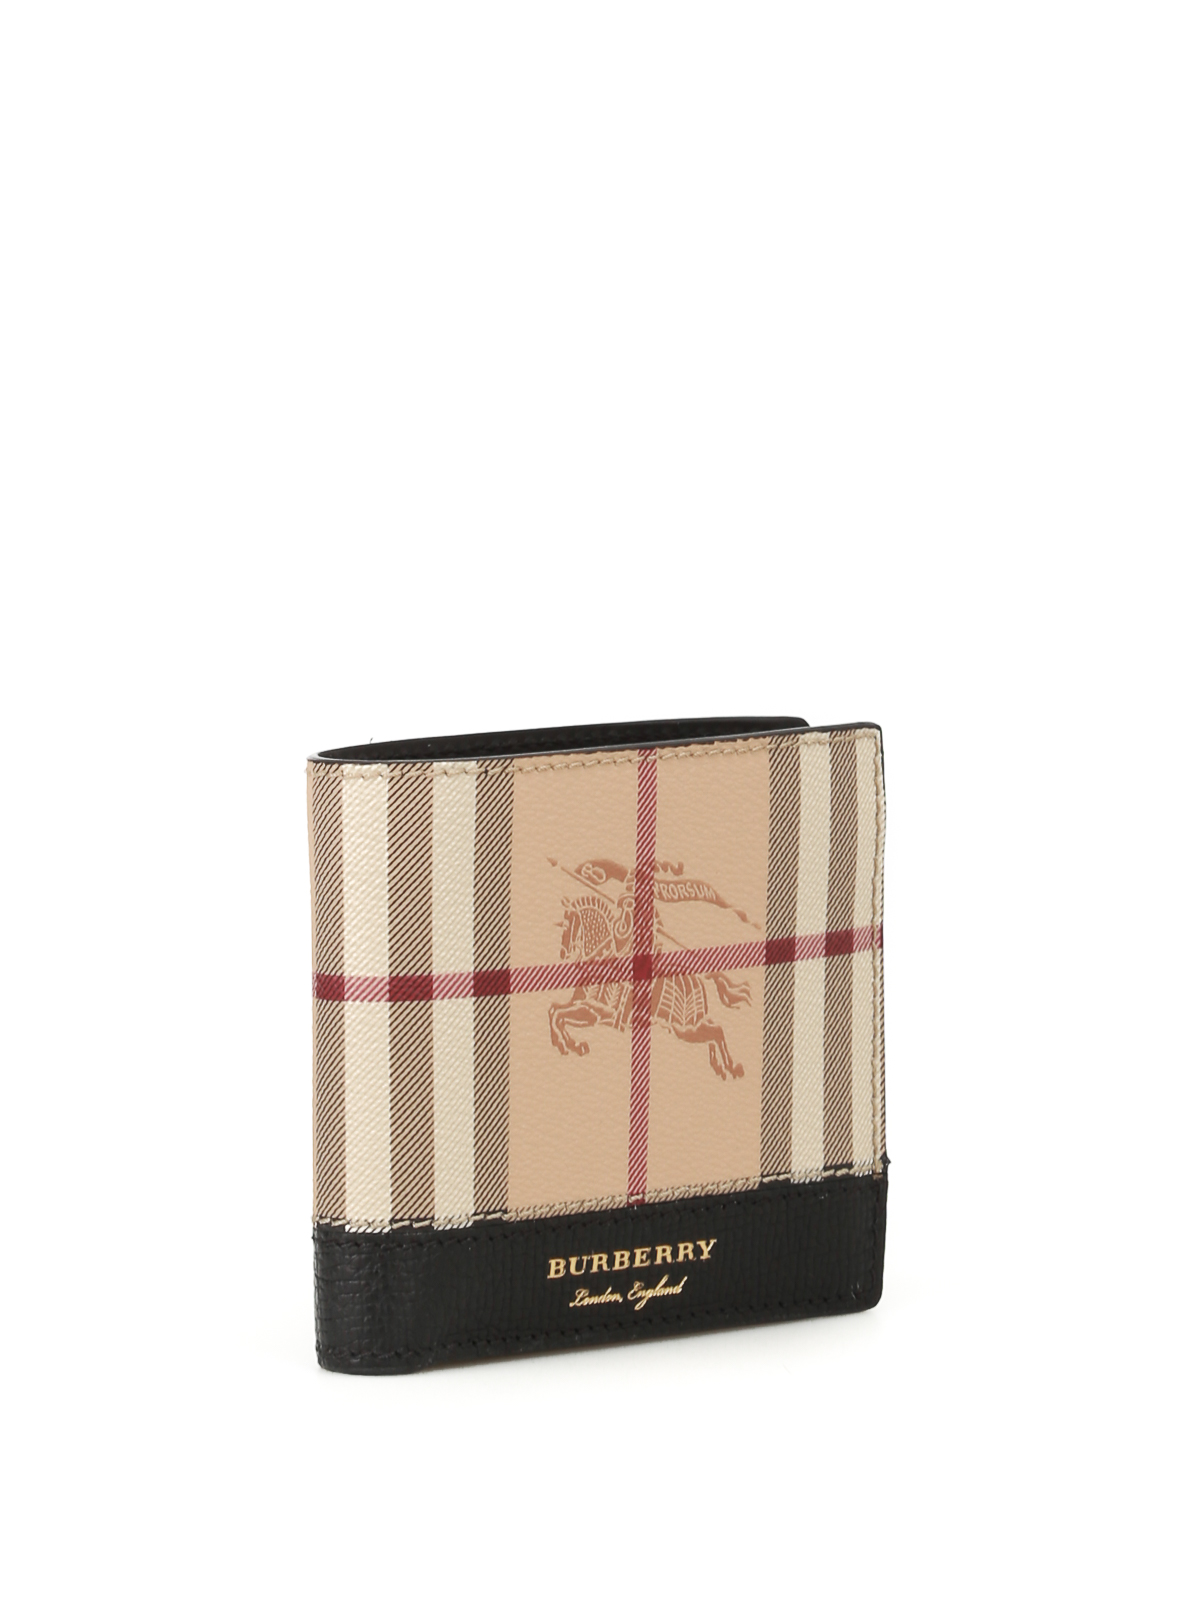 burberry trifold mens wallet